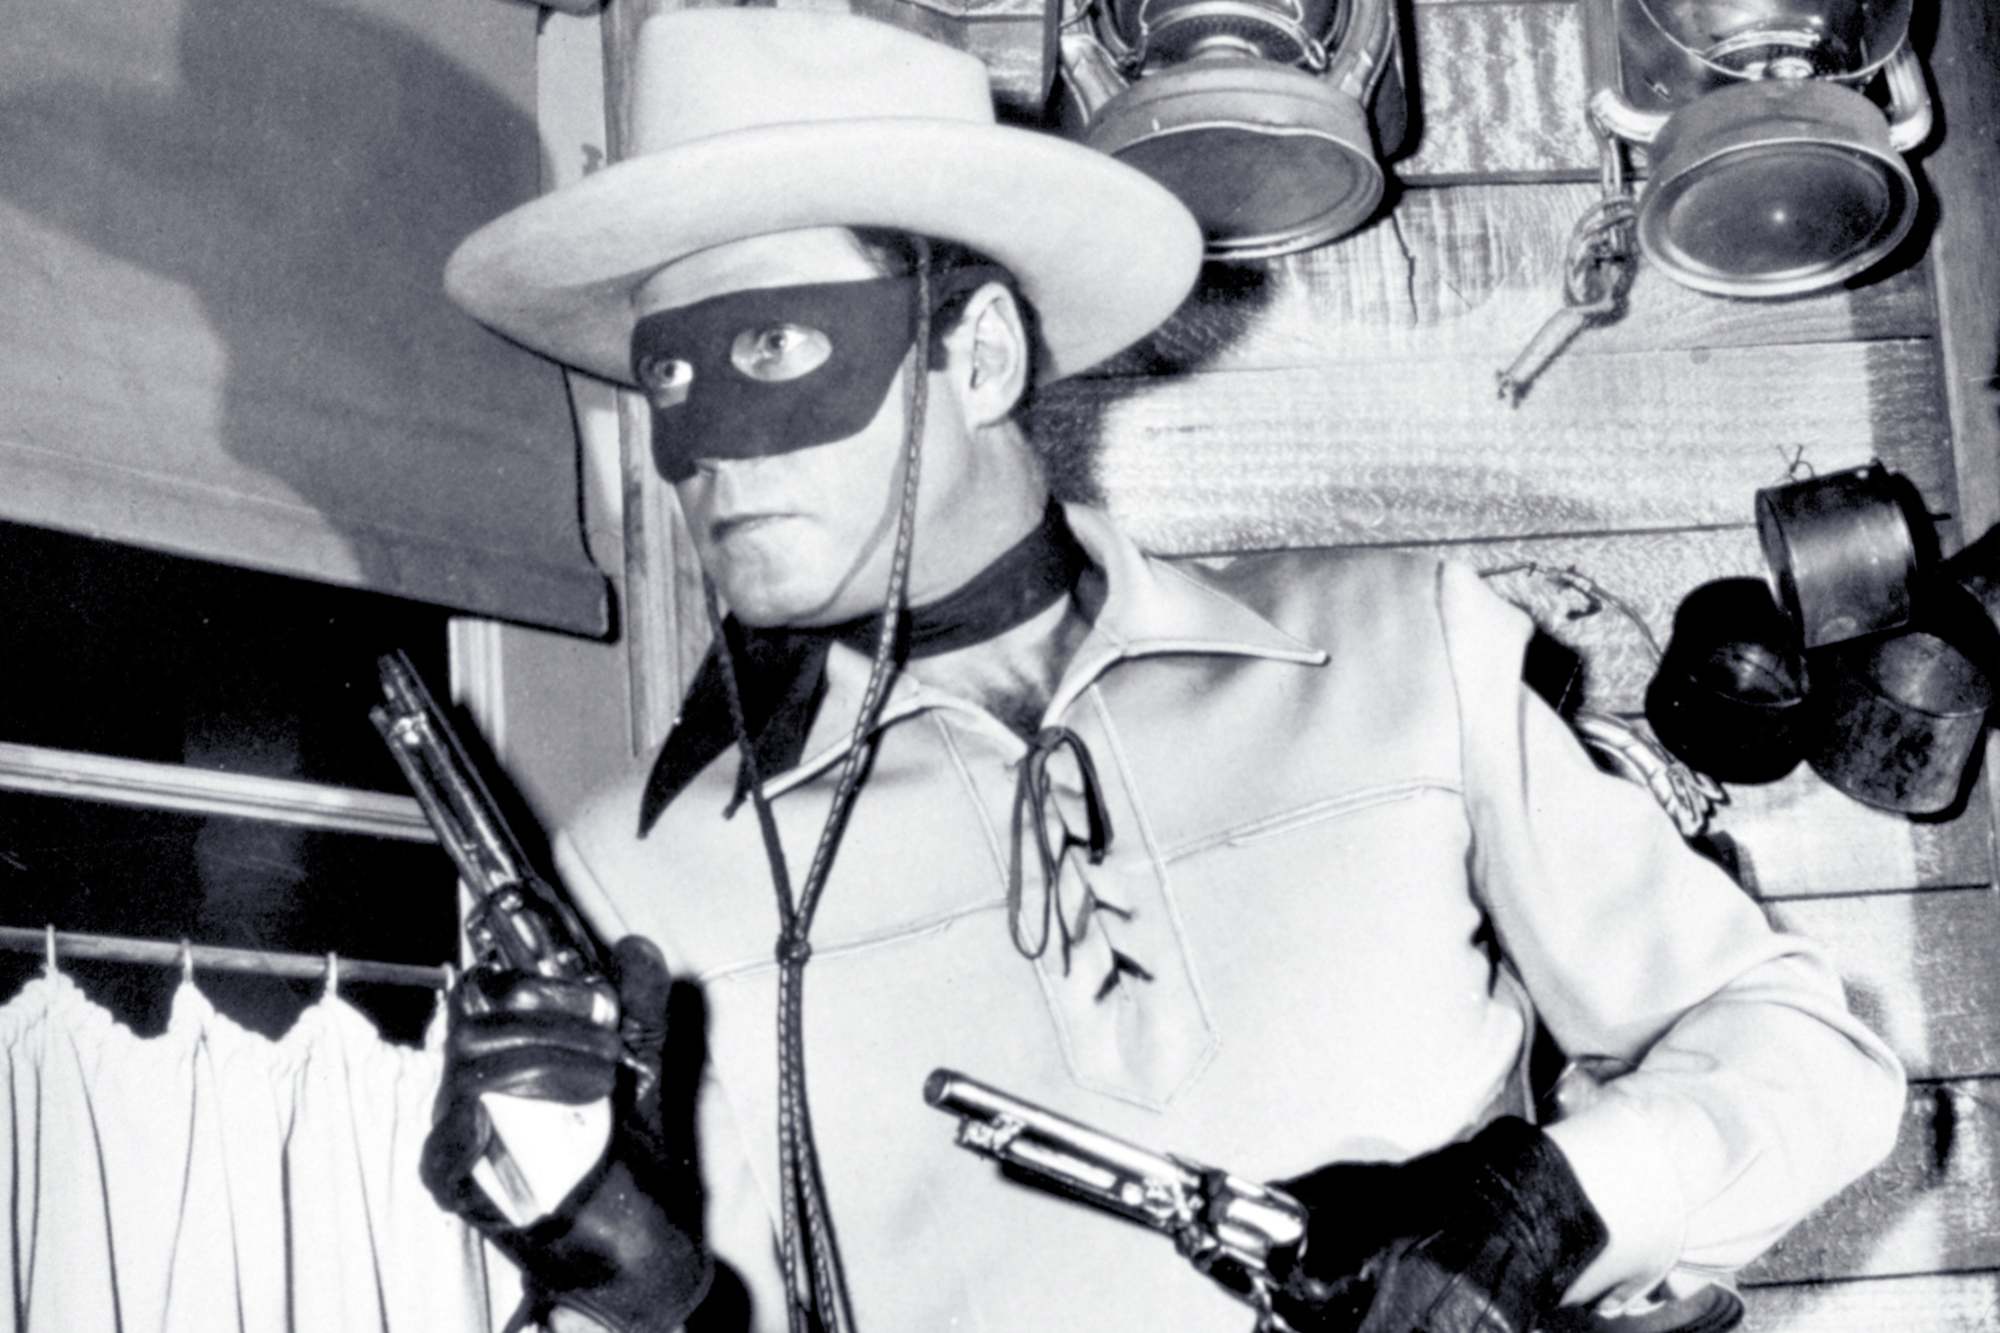 'The Lone Ranger' Clayton Moore as the Lone Ranger in script. He's holding two guns, wearing his mask and Western costume.